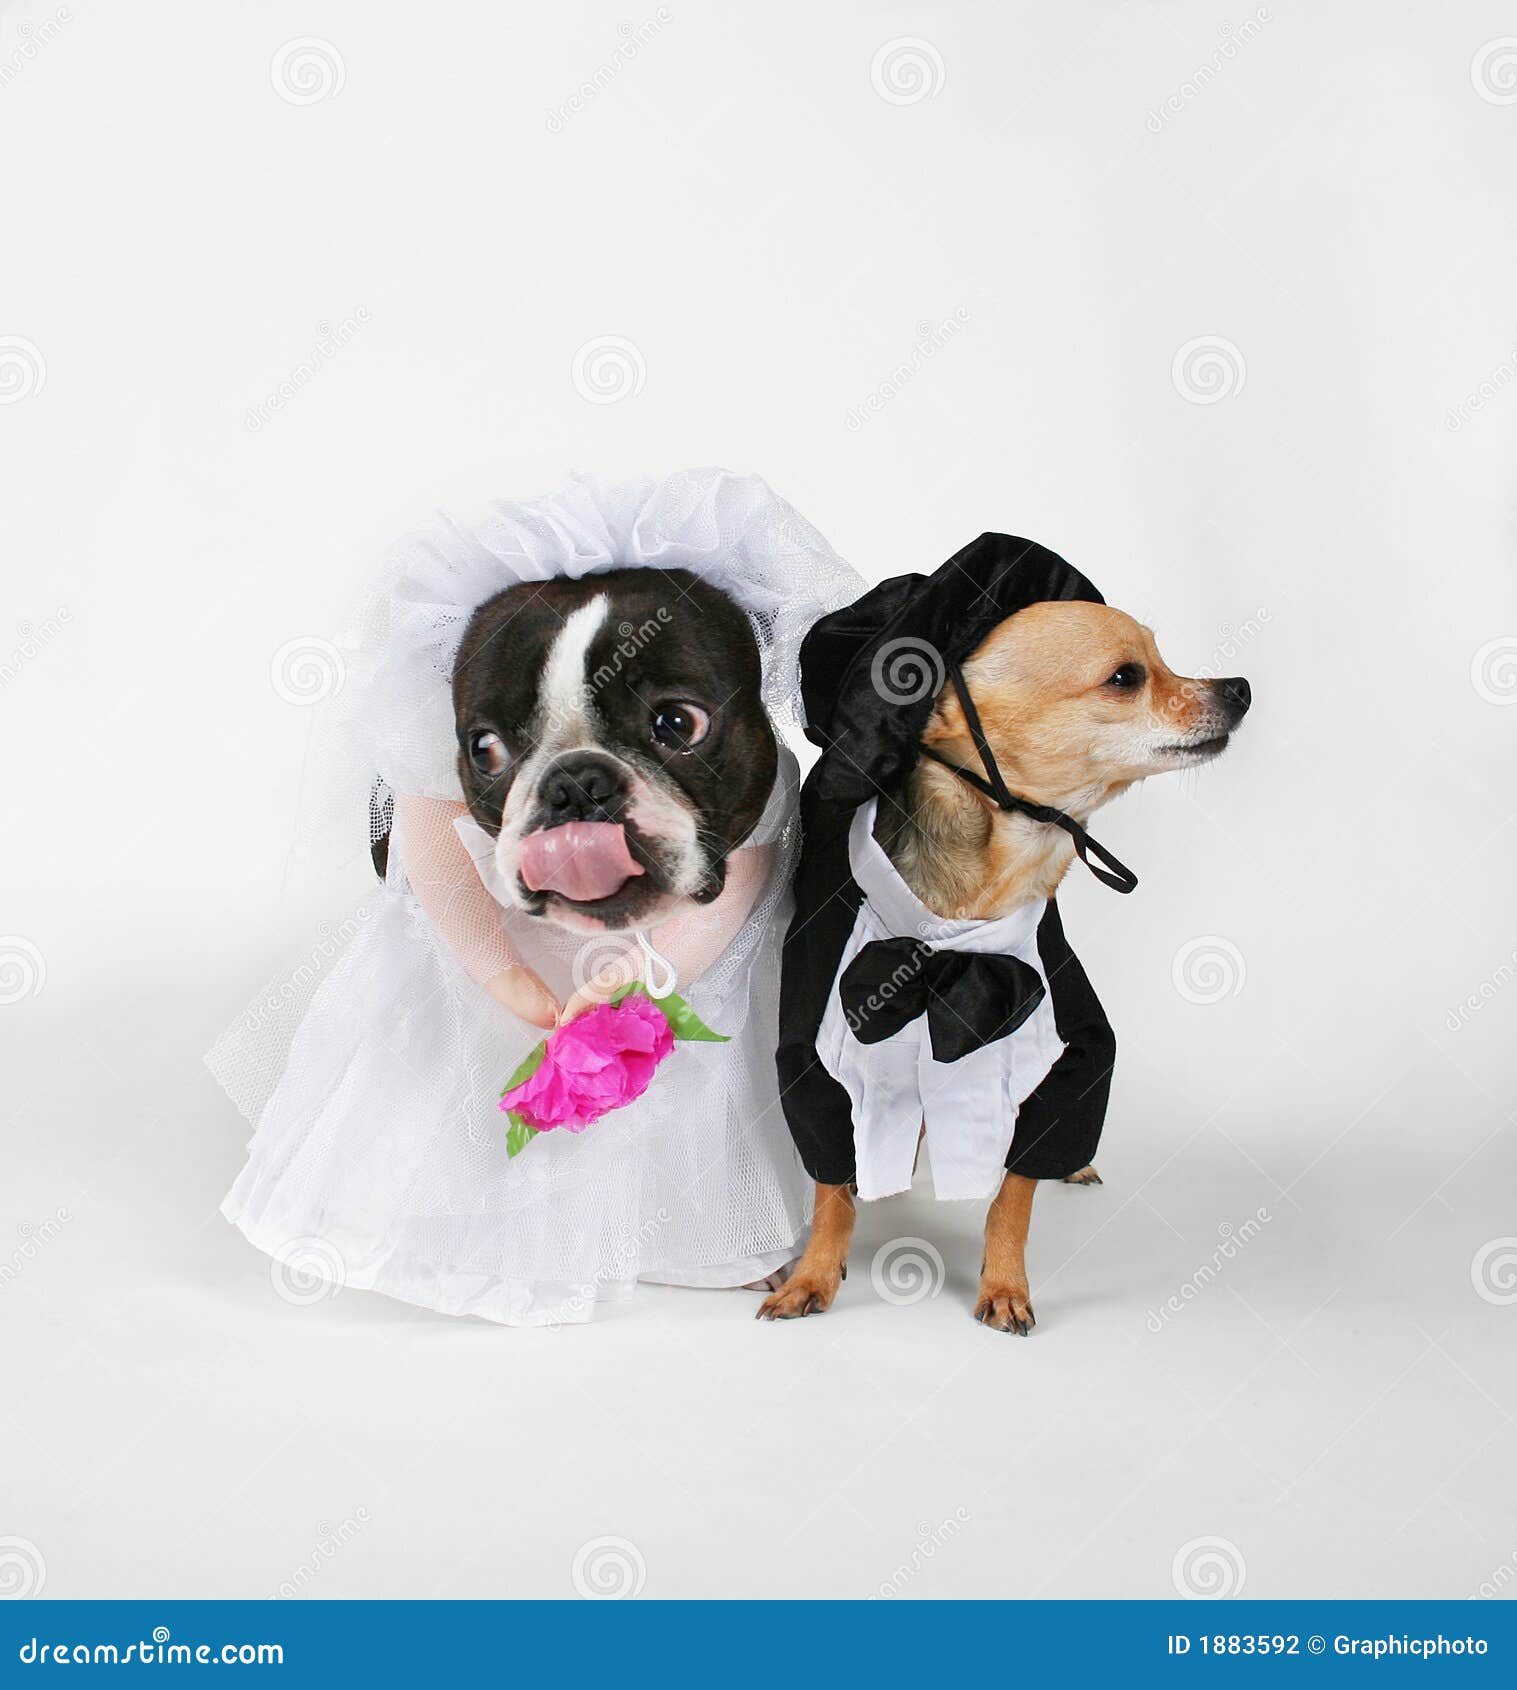 doggy marriage